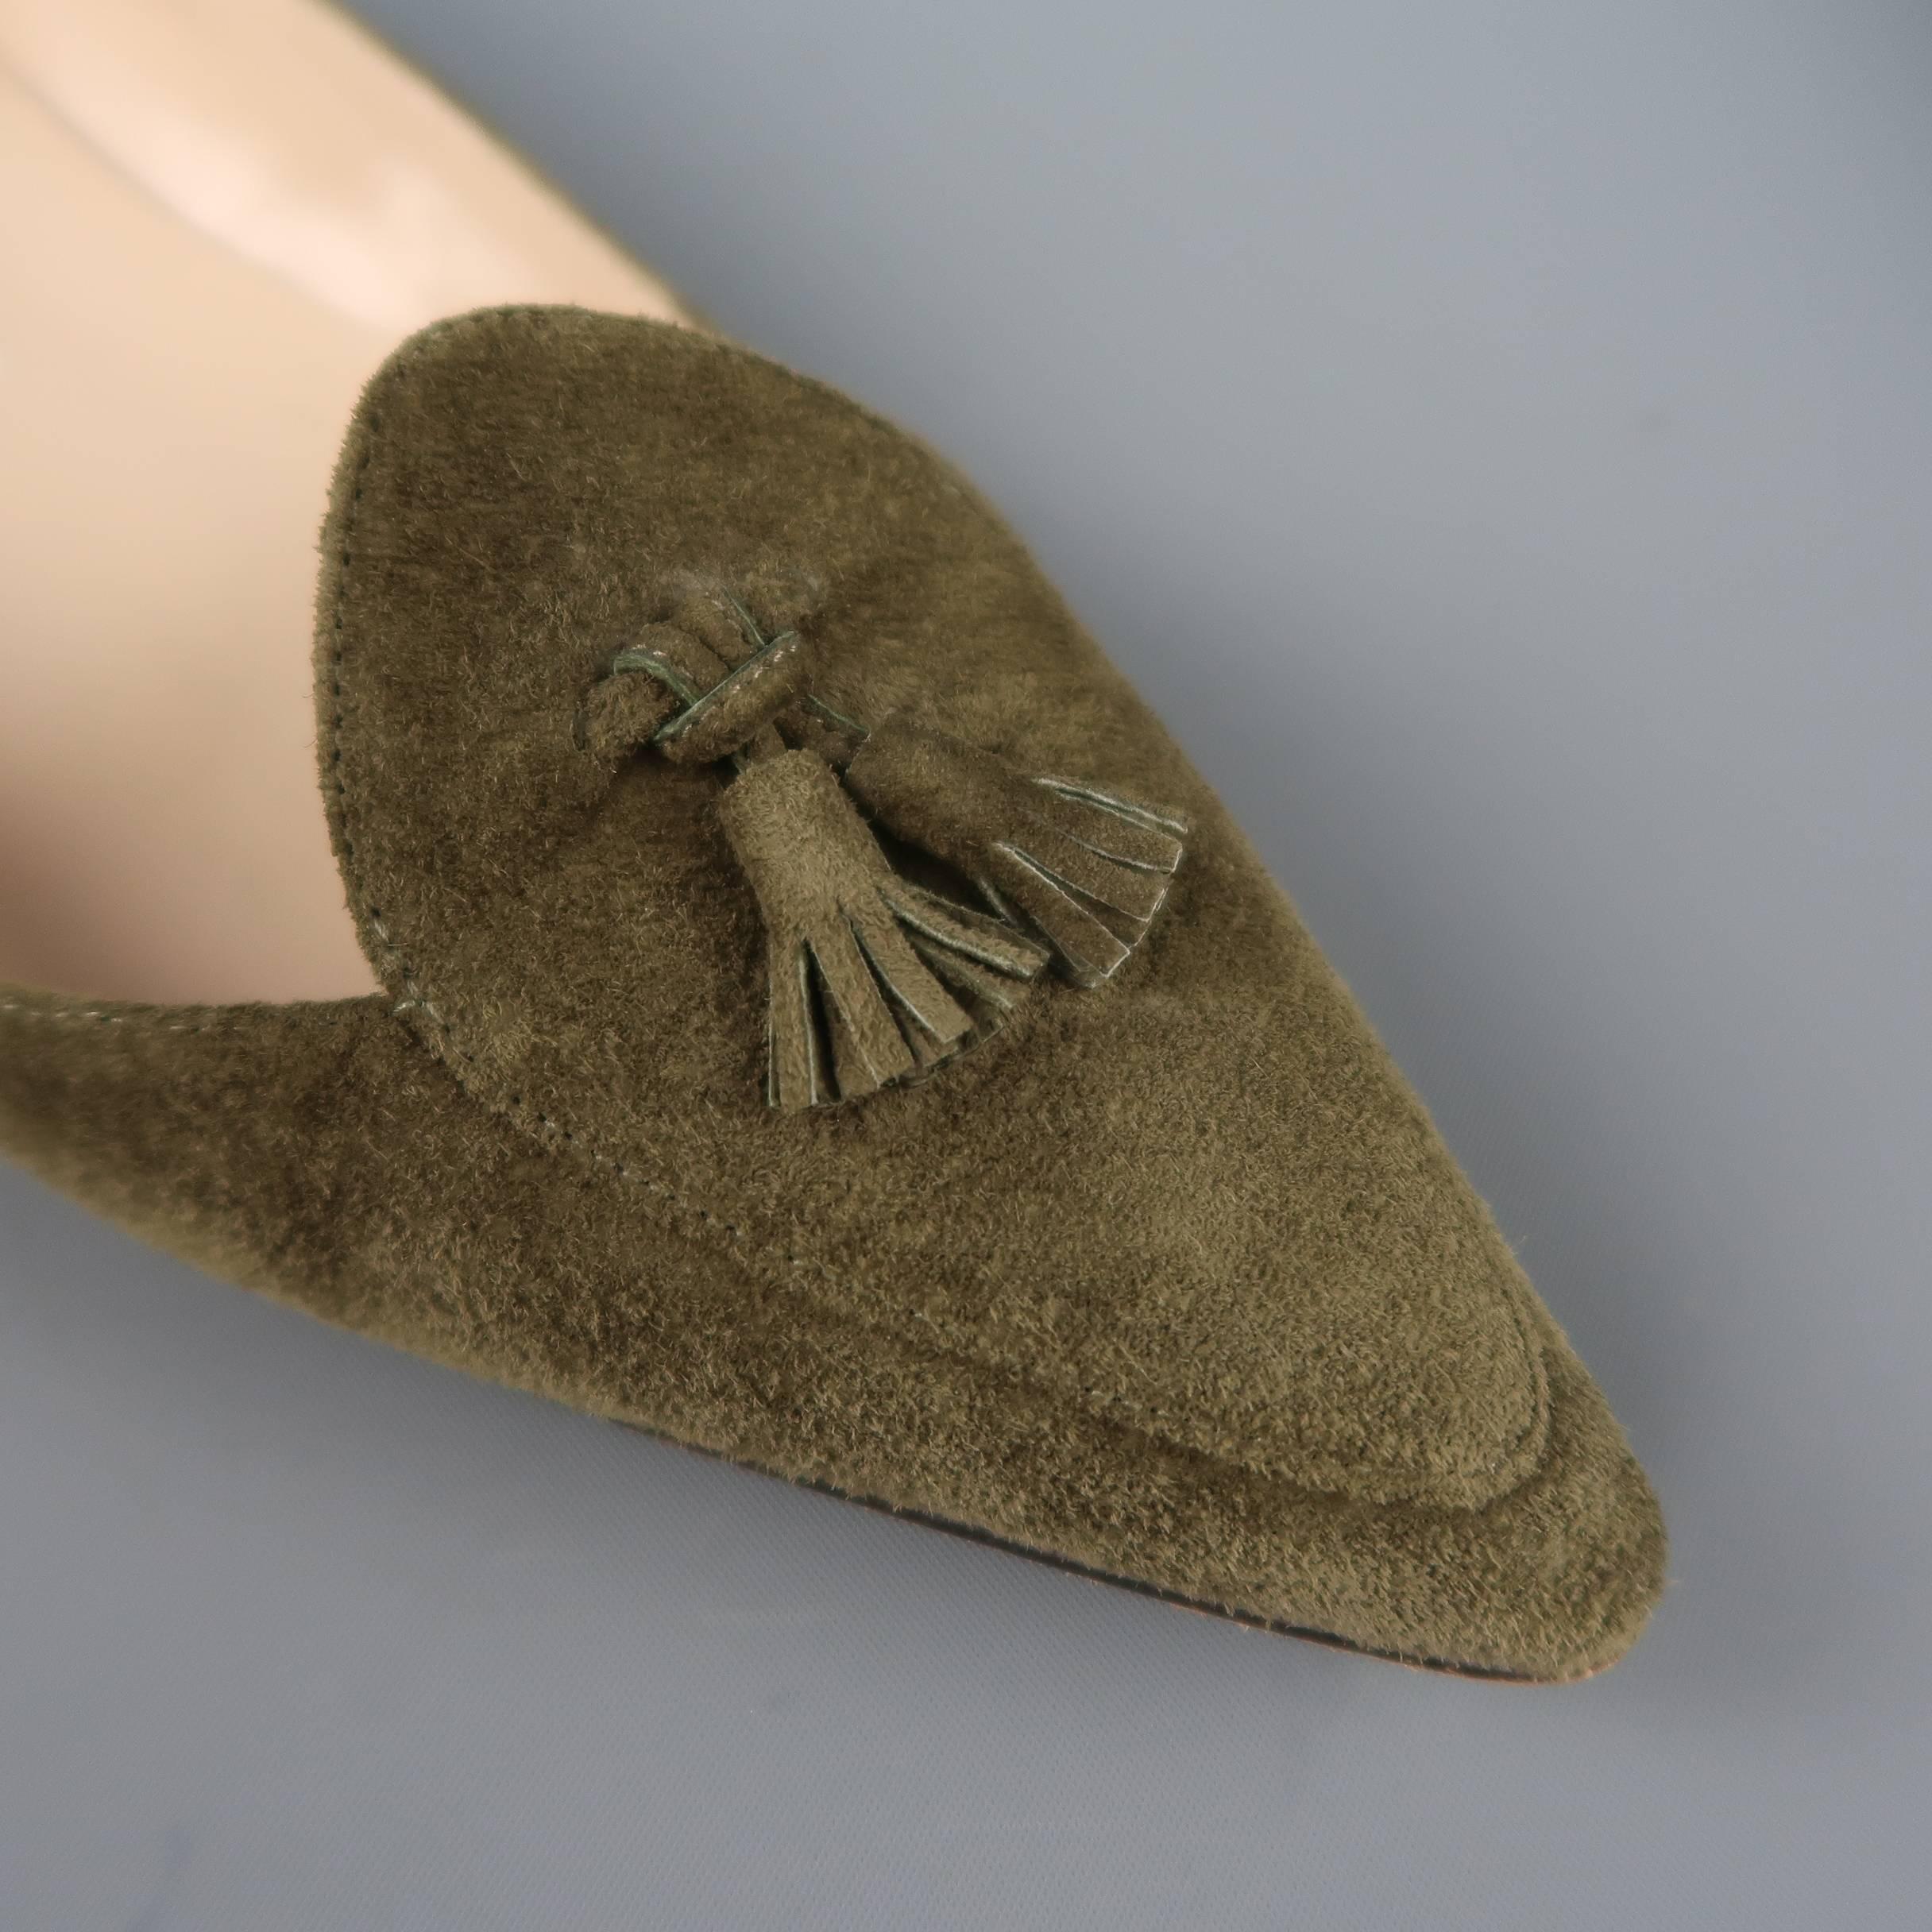 olive green suede loafers